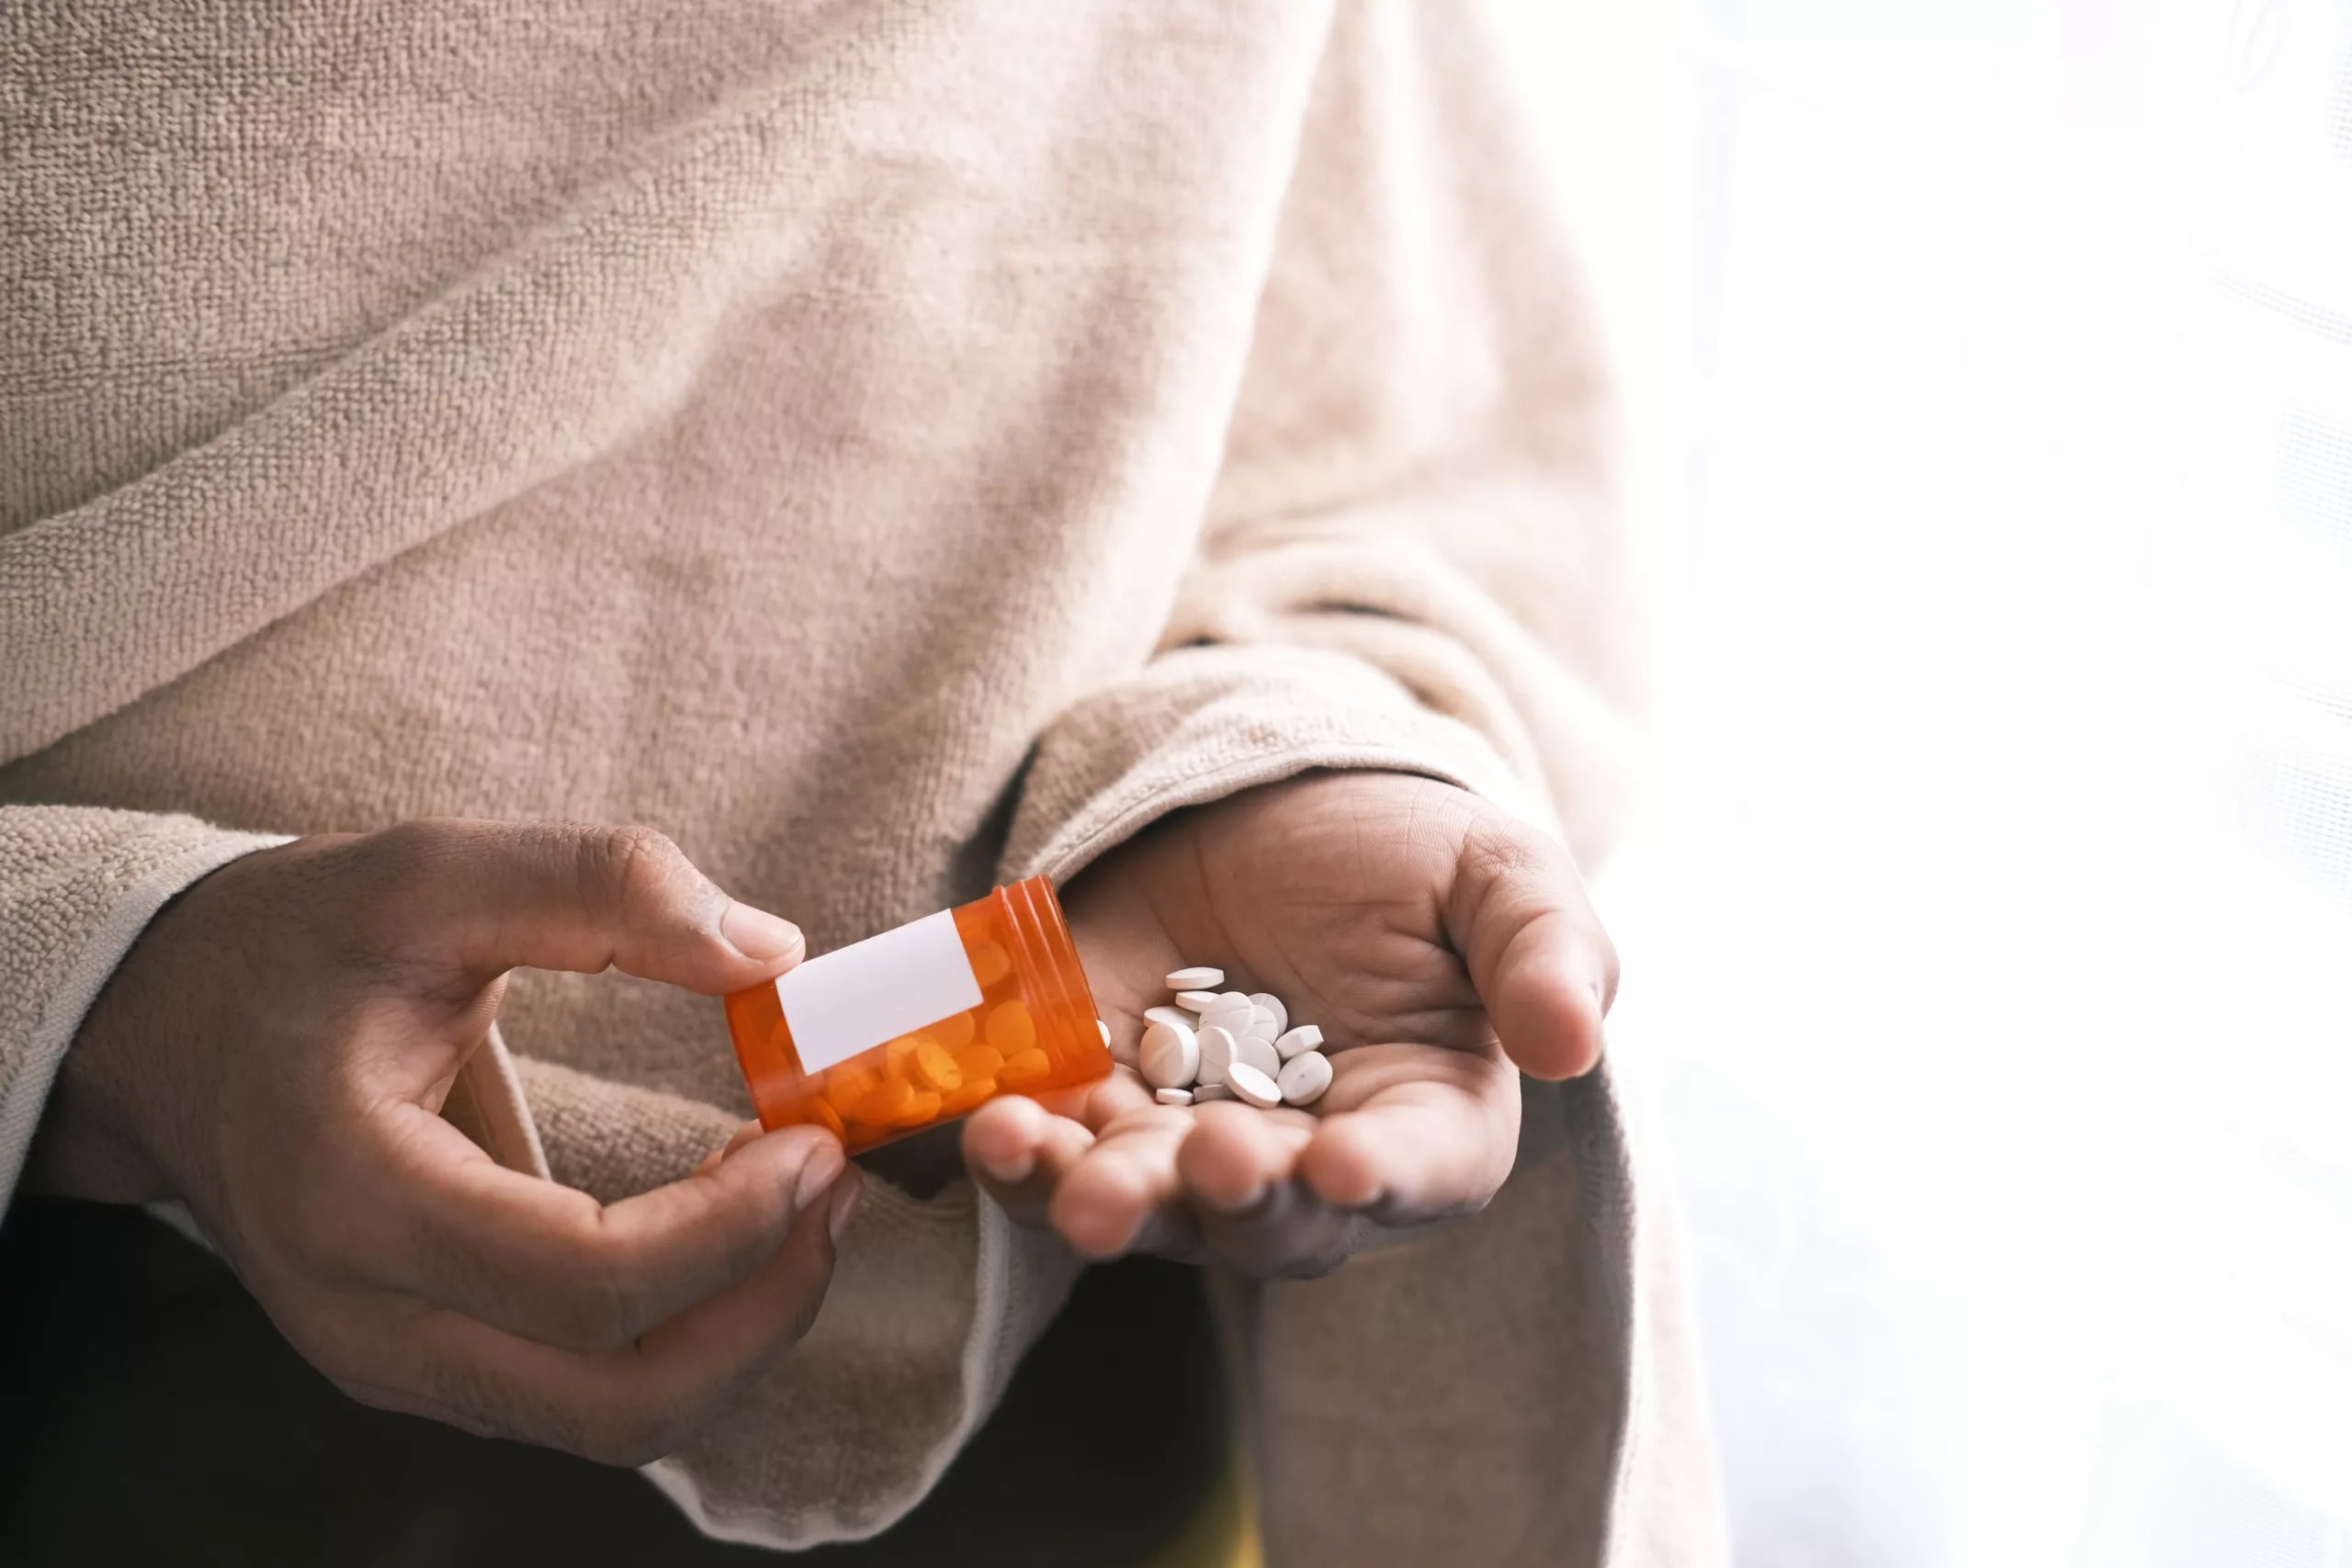 “Vending Machine Harm Reduction (VMHR) could be a feasible and acceptable modality to reduce death and disease transmission associated with the opioid and HIV epidemics” – Recent Study Reveals